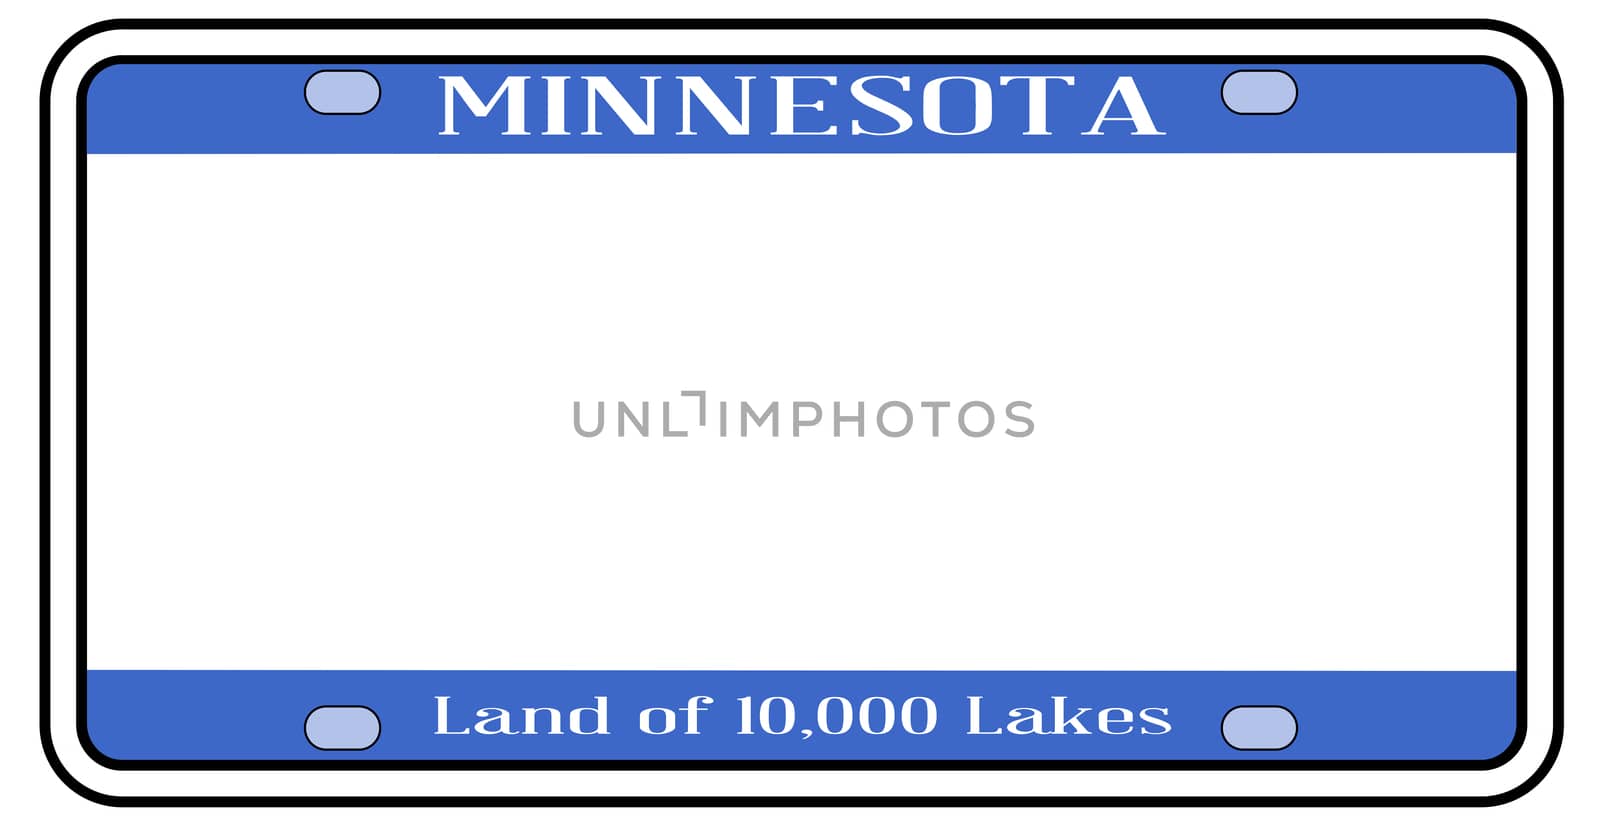 Blank Minnesota state license plate in the colors of the state flag over a white background